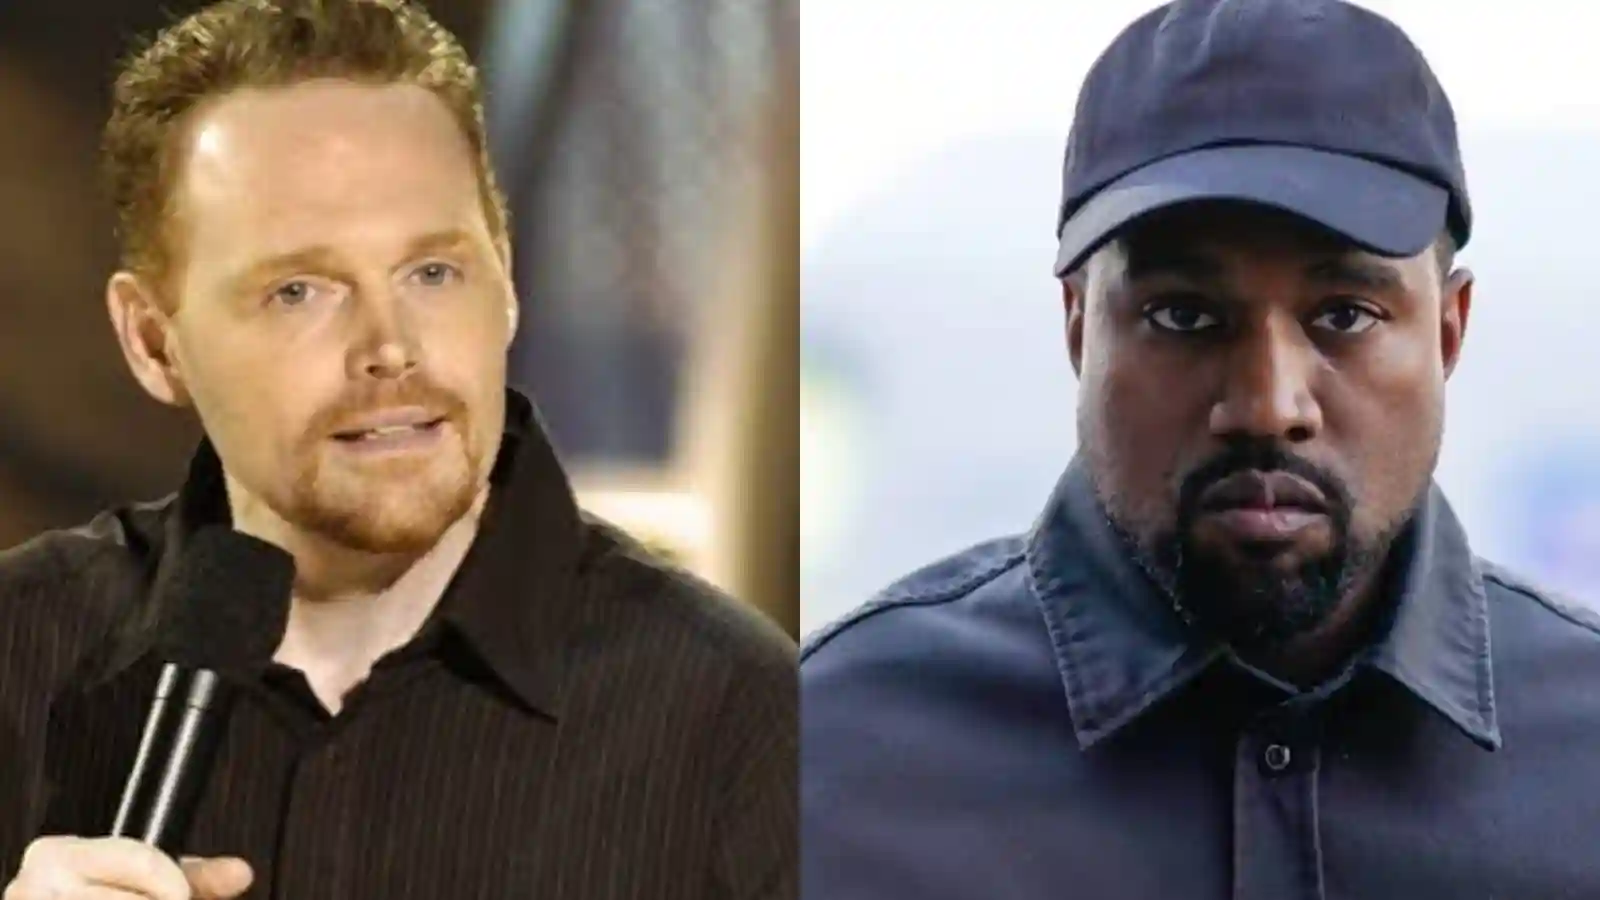 Bill Burr and Kanye West